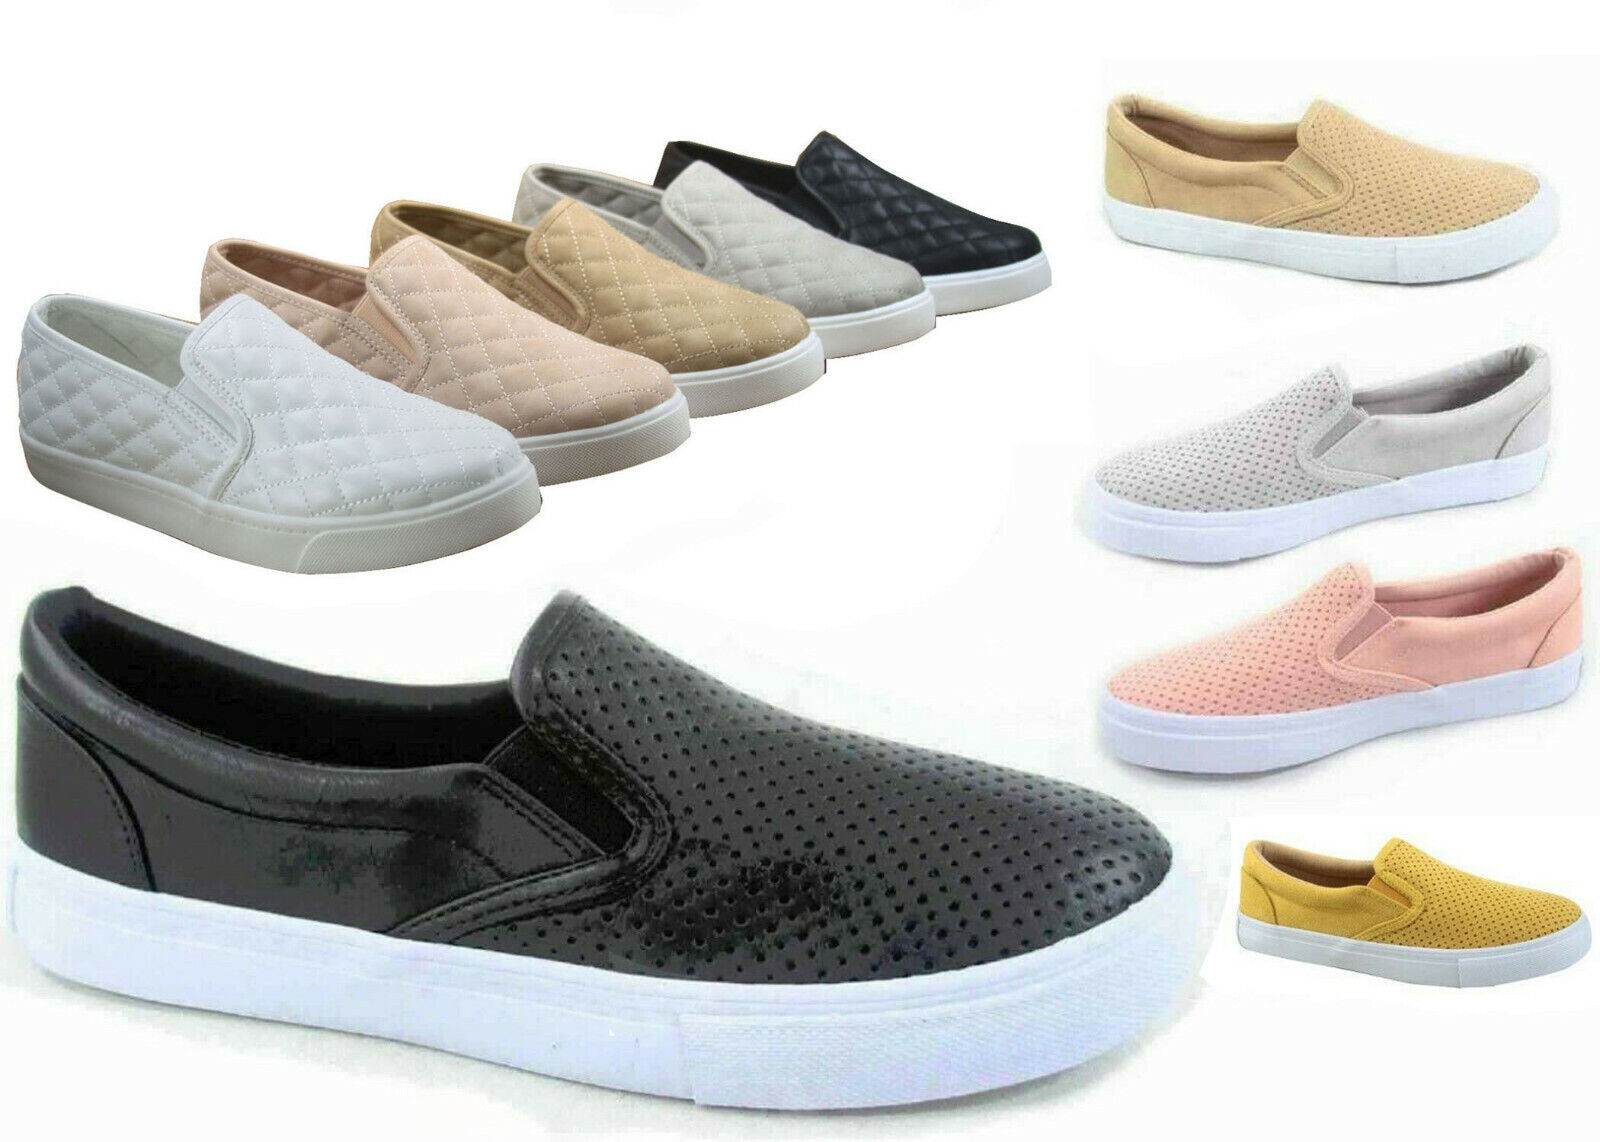 NEW Soda Women's Perforated Slip On Flat  Round Toe Sneaker Shoes Size 5.5 - 11  Soda